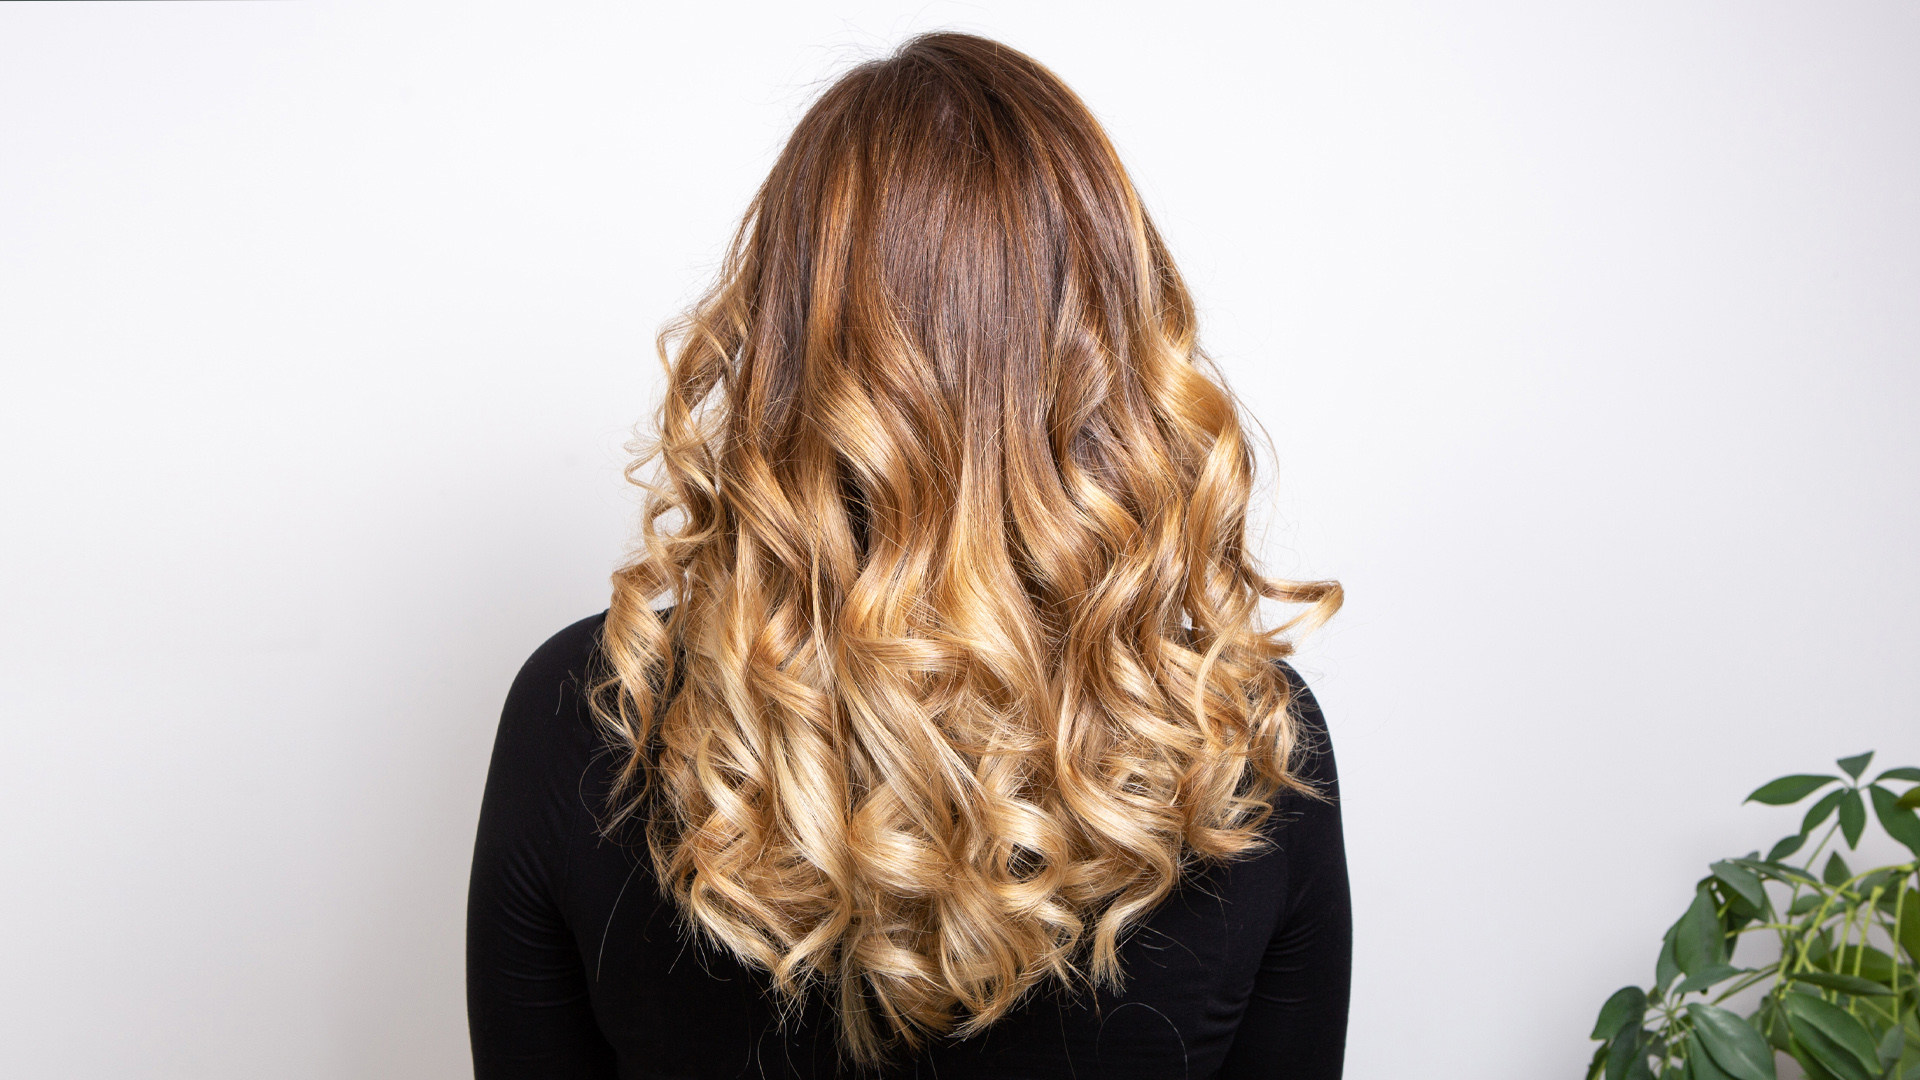 What Is This New Trend of Balayage Hair Color Technique?